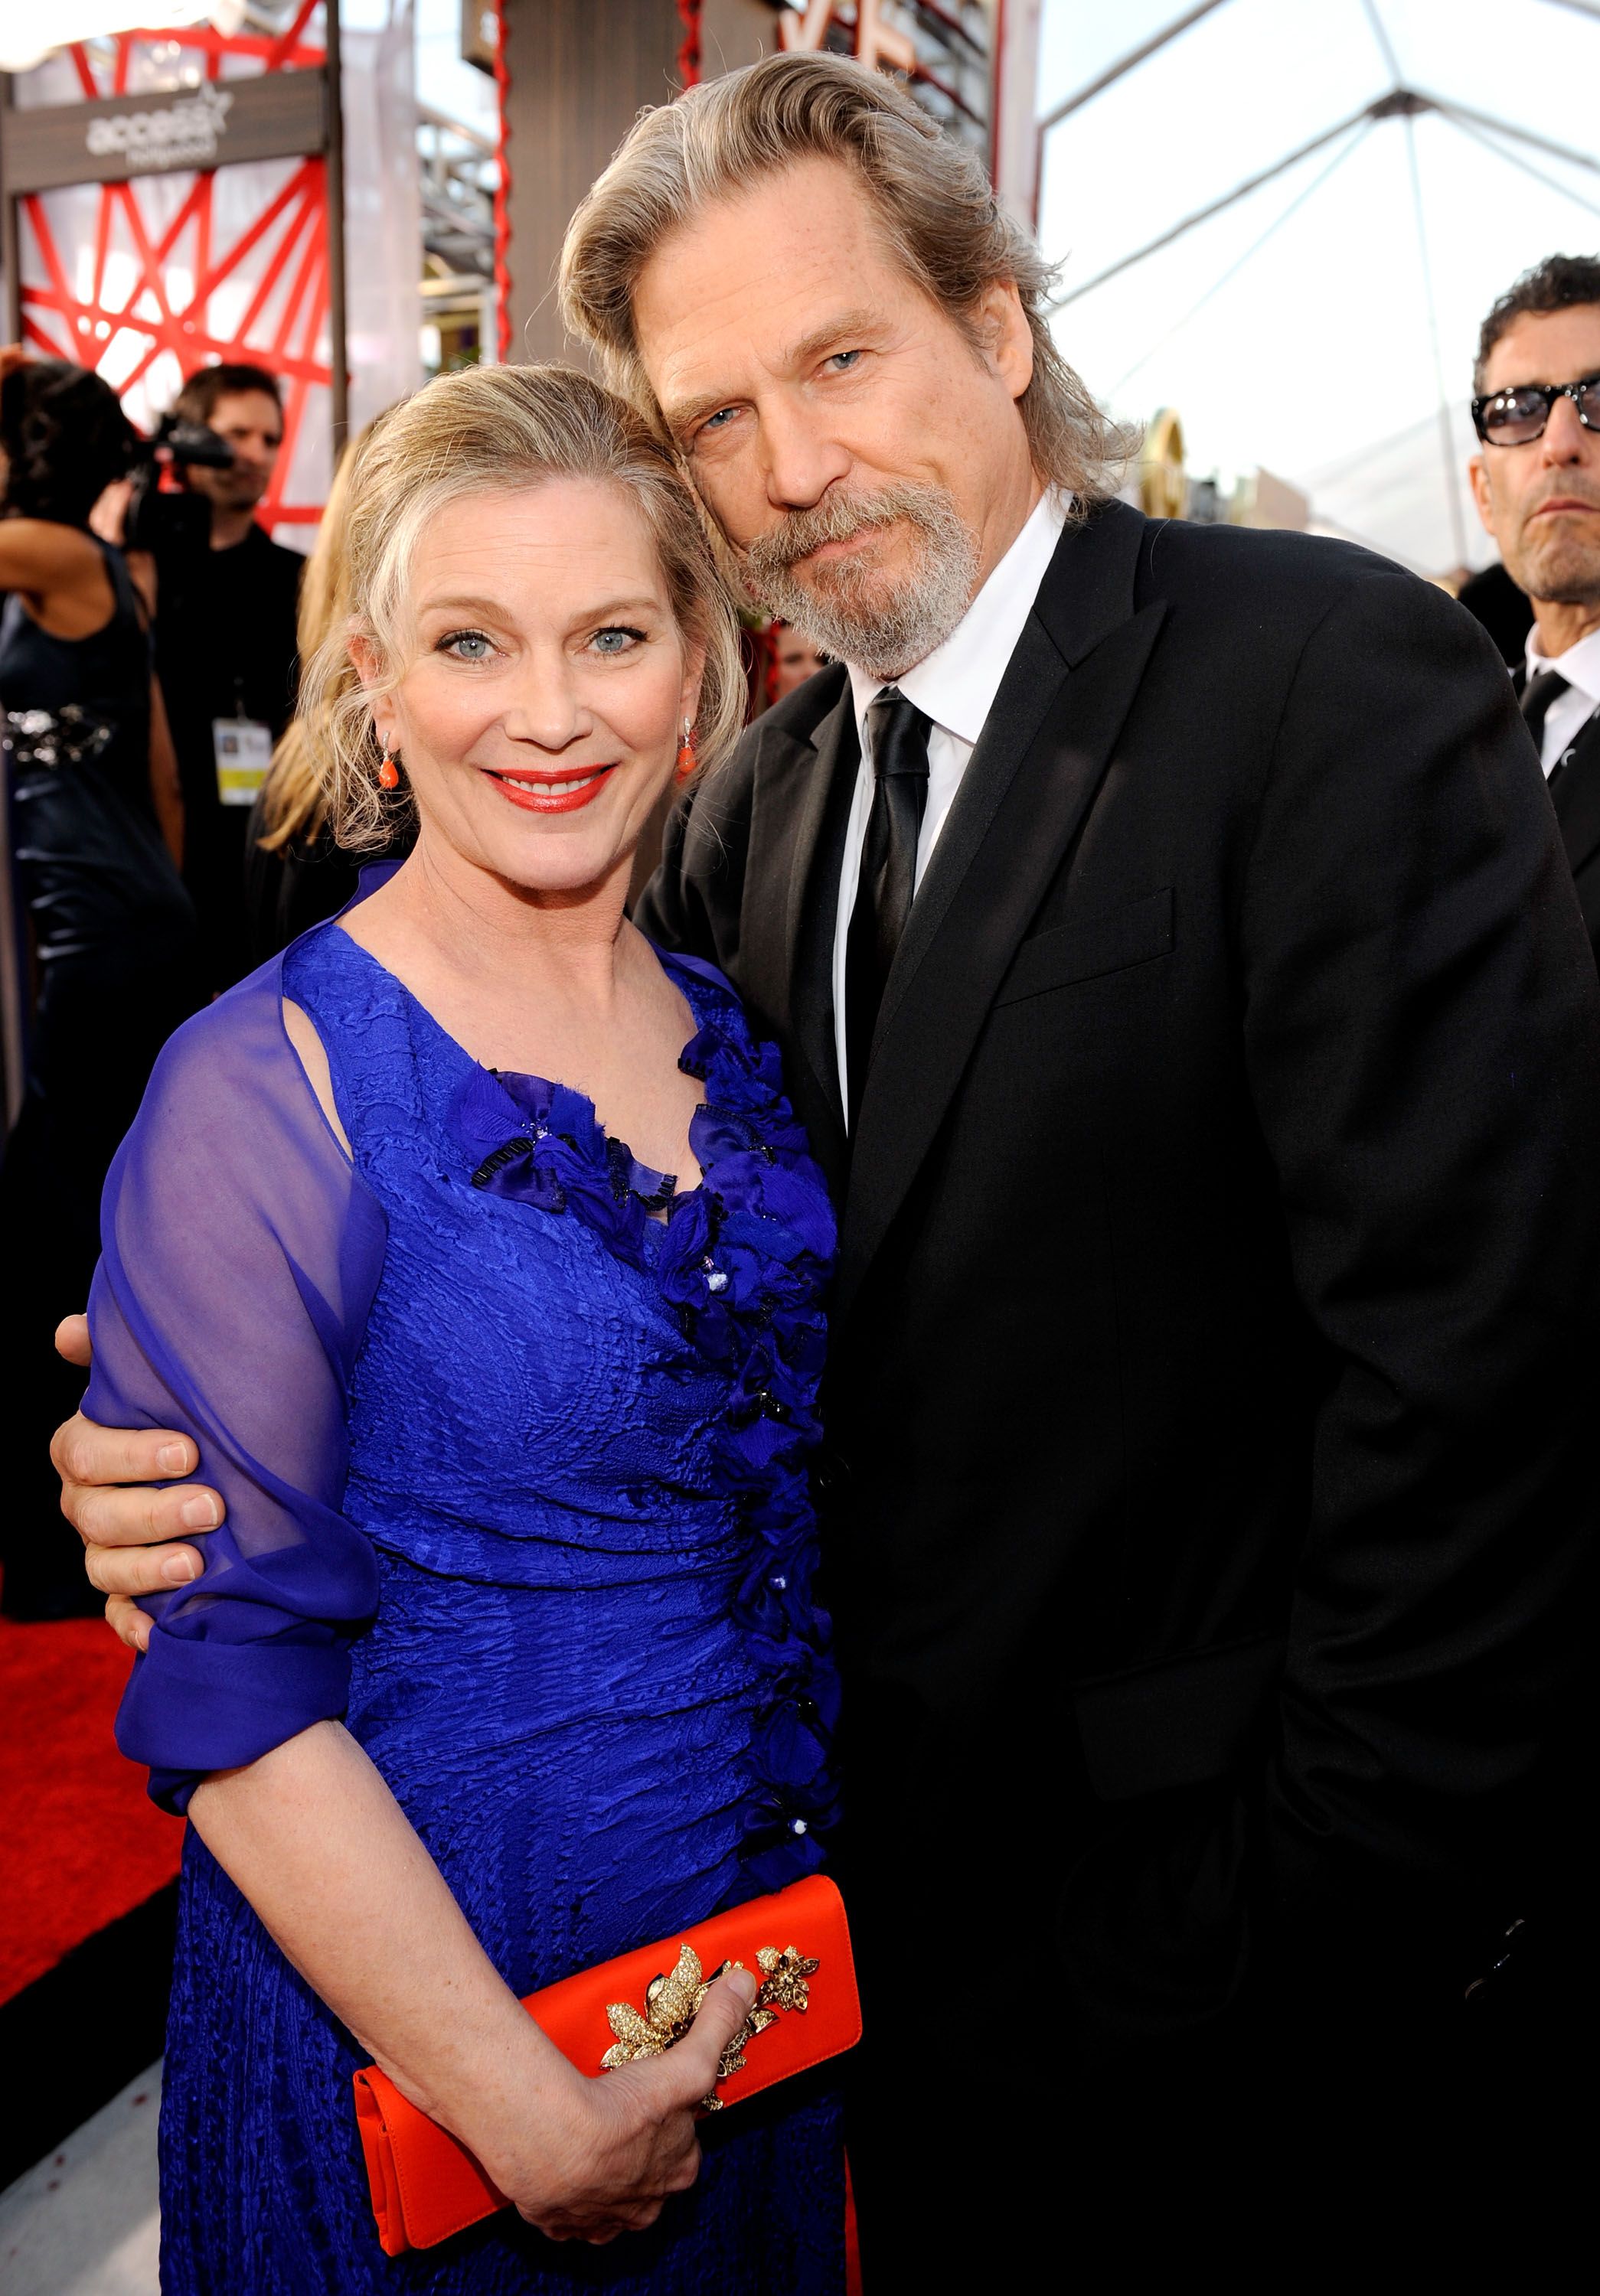 Susan Geston and actor Jeff Bridges at the 16th Annual Screen Actors Guild Awards held at the Shrine Auditorium on January 23, 2010 | Photo: Getty Images